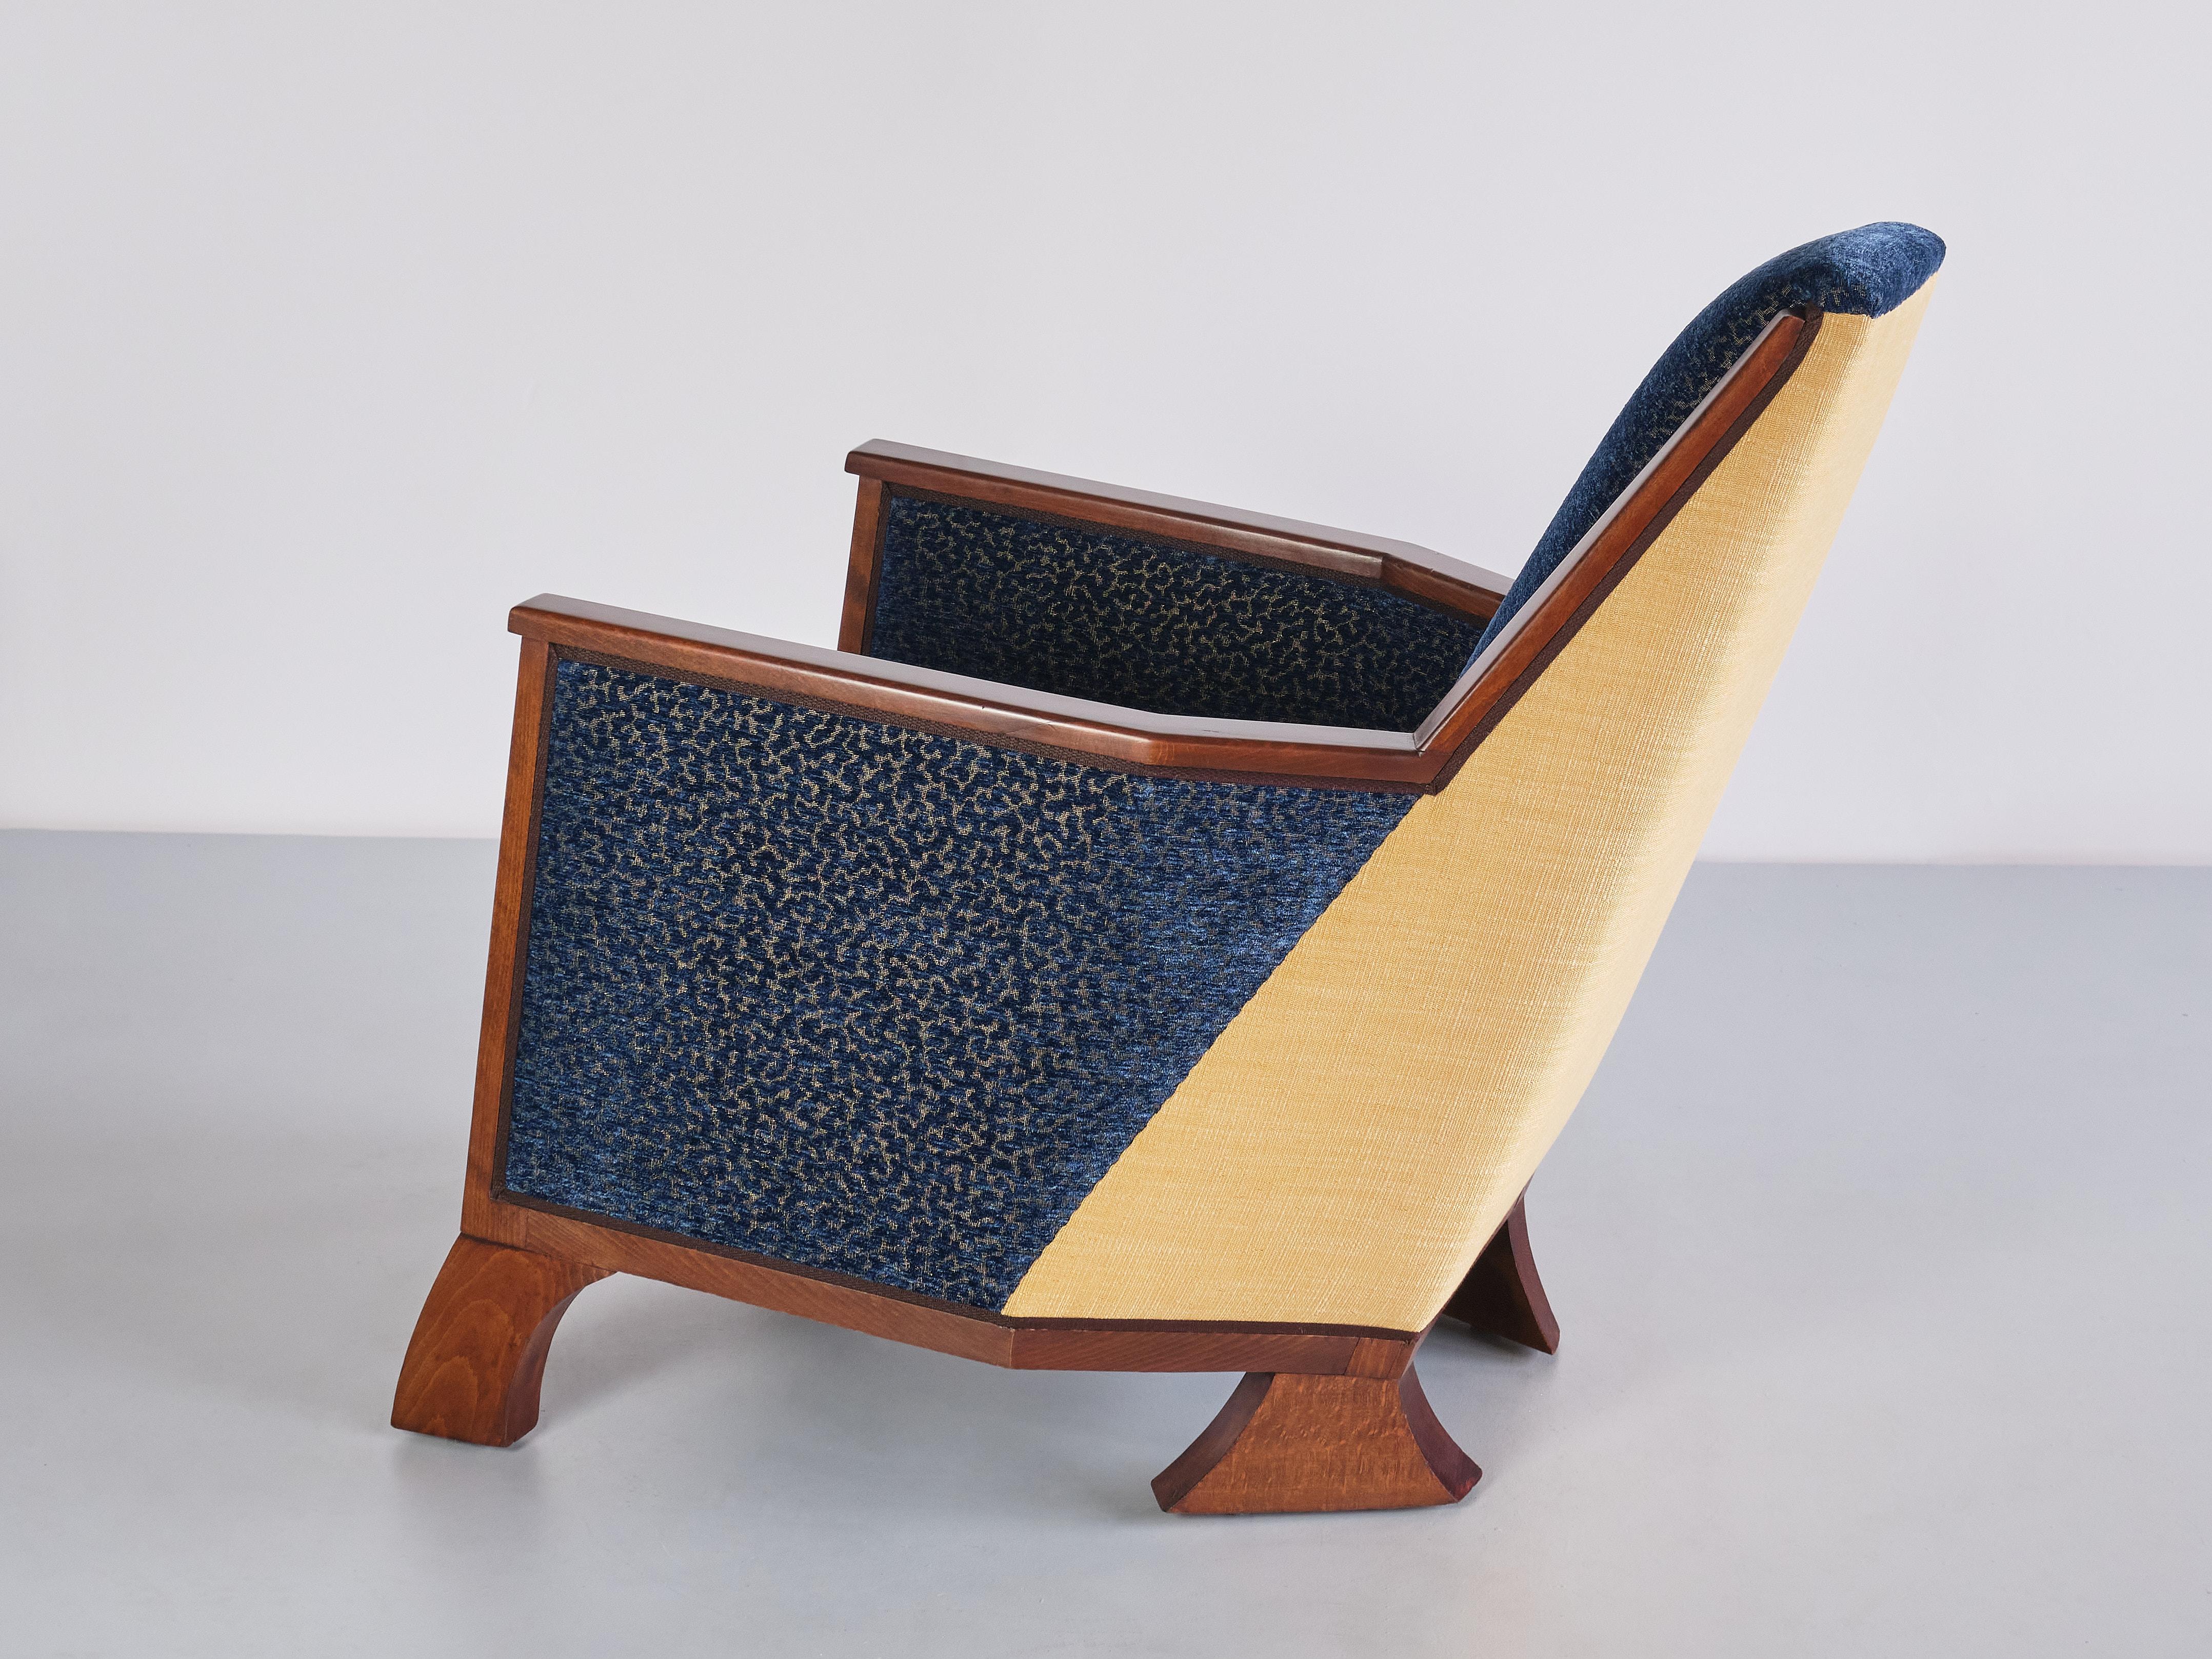 Exceptional Art Deco Arm Chair in Blue Velvet and Maple, Northern France, 1920s For Sale 7